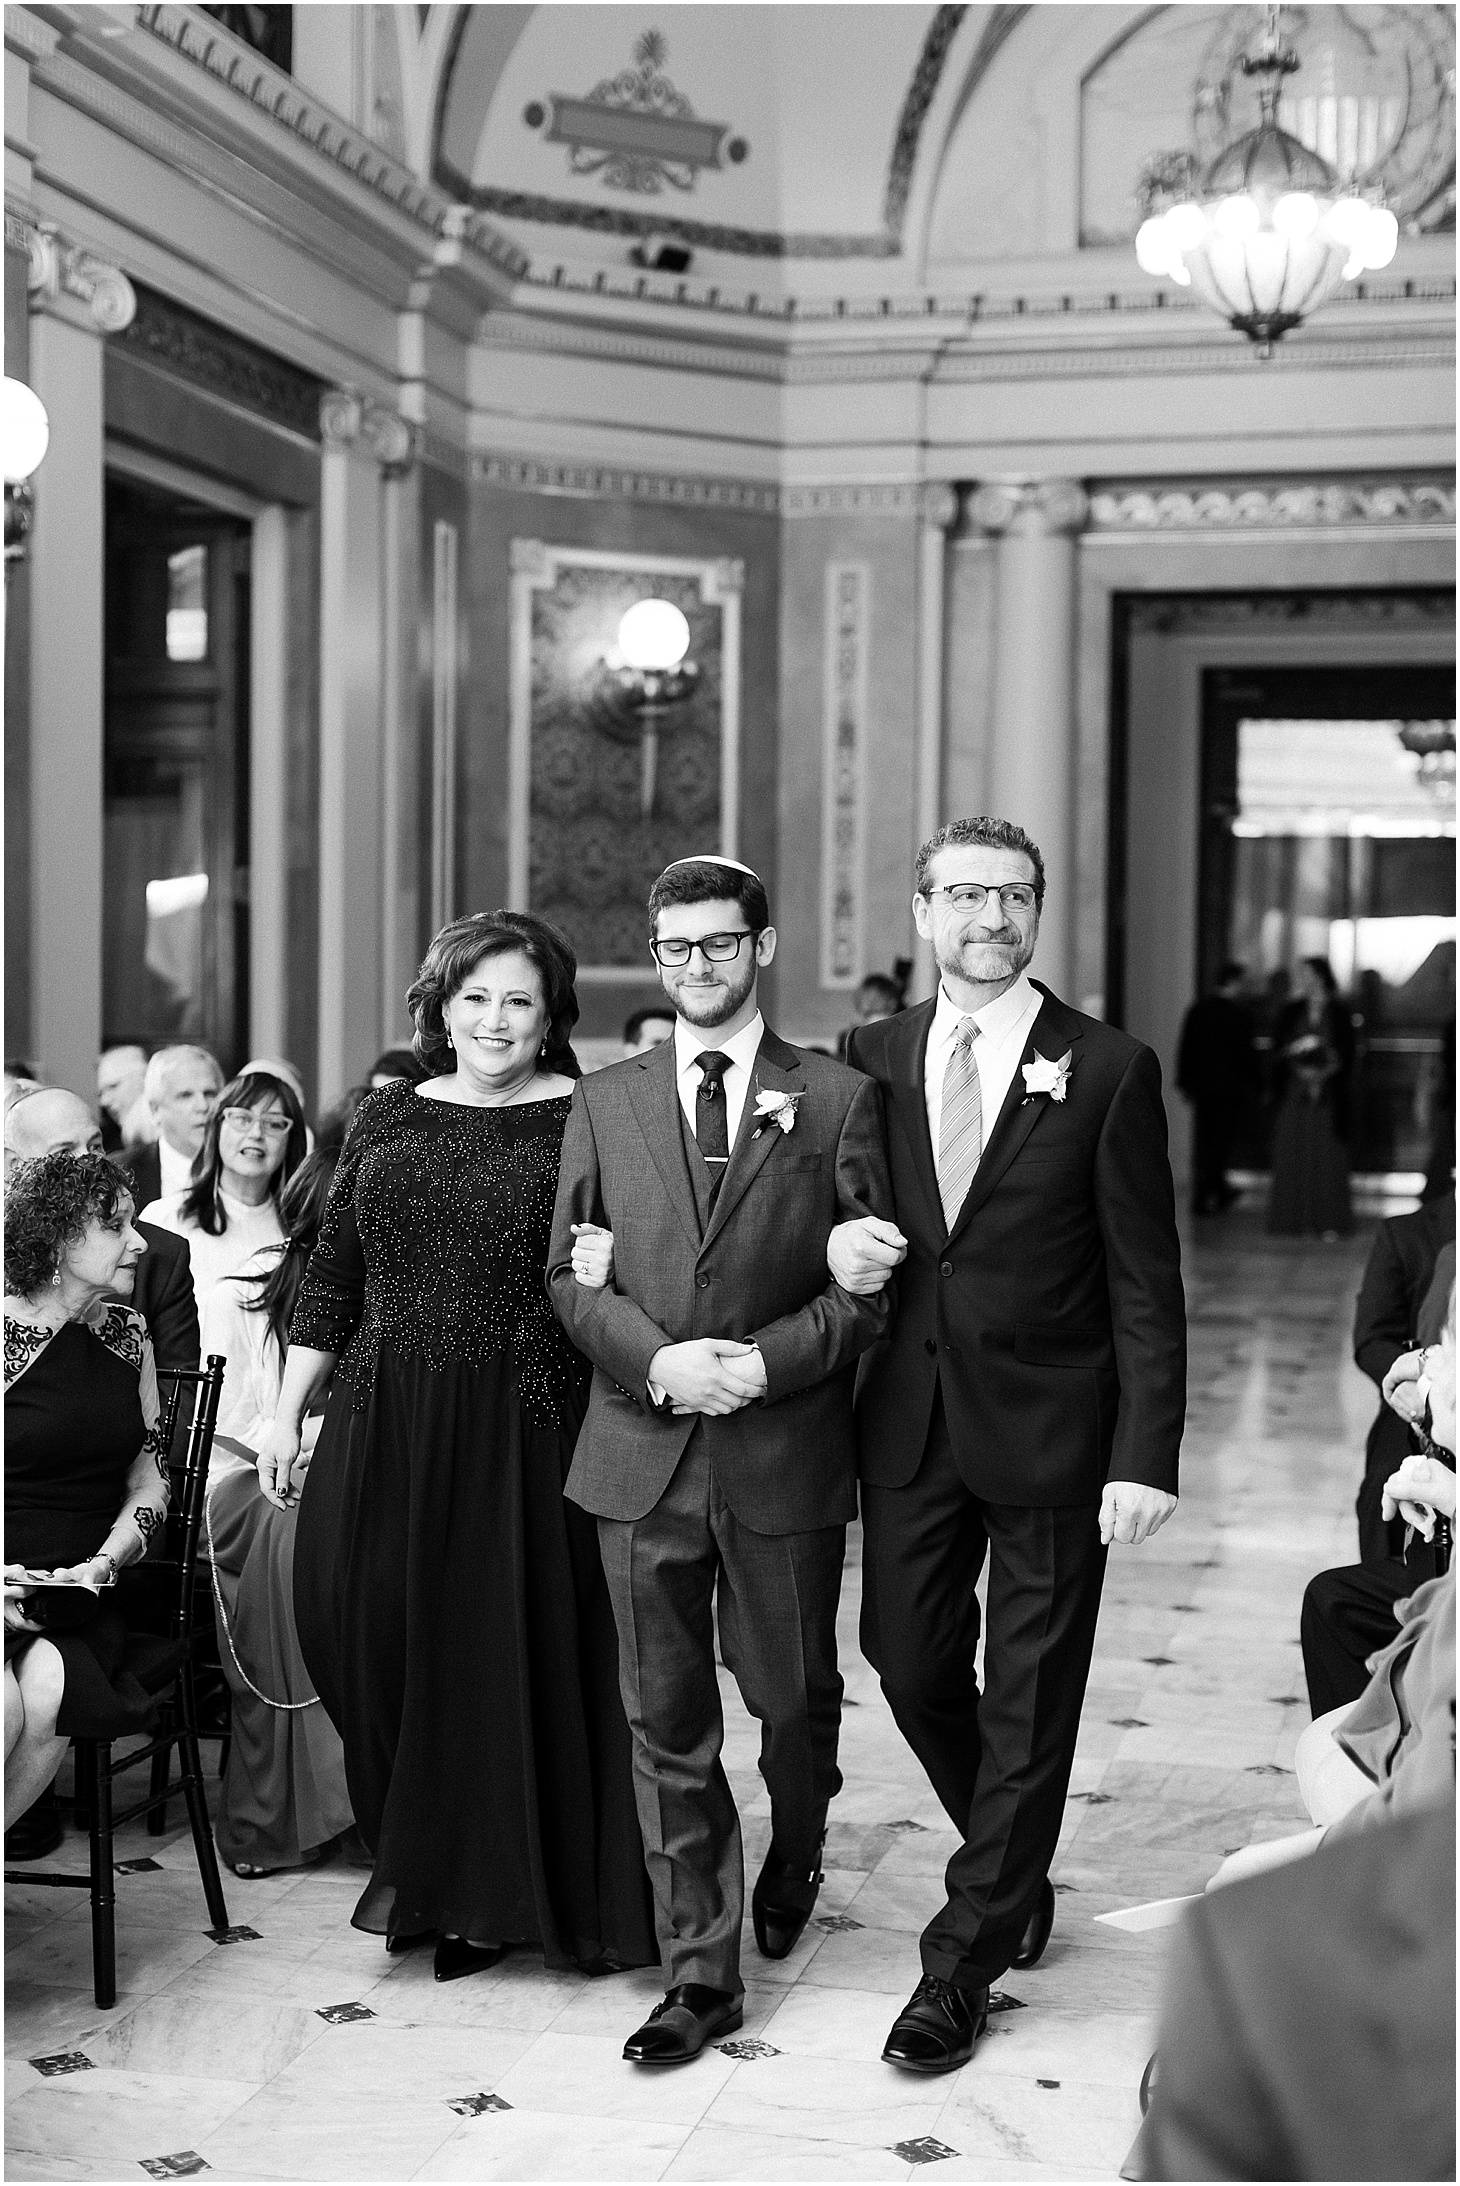 Wedding Ceremony in Presidential Suite at Union Station, Hexagon-Inspired Emerald Wedding at Union Station in Washington DC, Sarah Bradshaw Photography